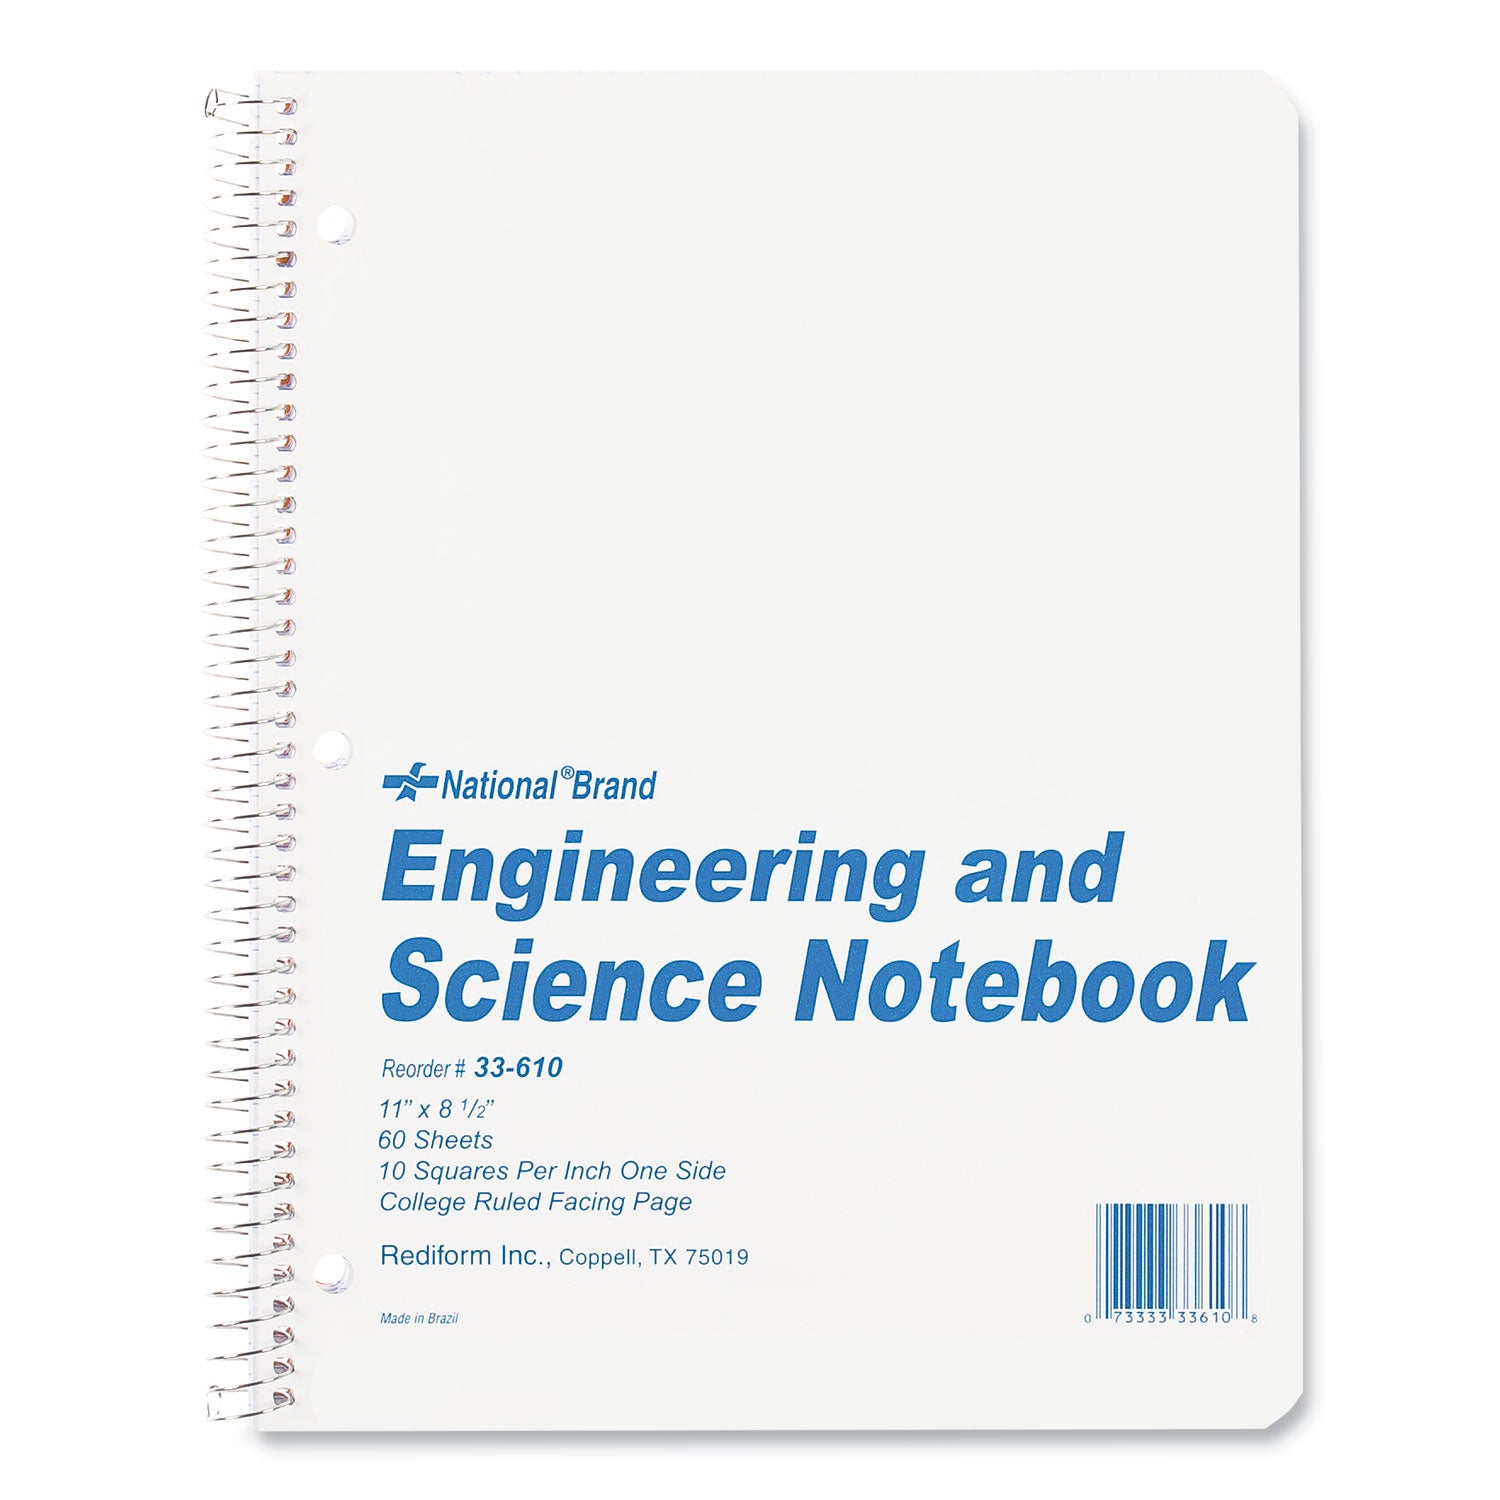 Engineering and Science Notebook, Quadrille Rule (10 sq/in), White Cover, (60) 11 x 8.5 Sheets - 